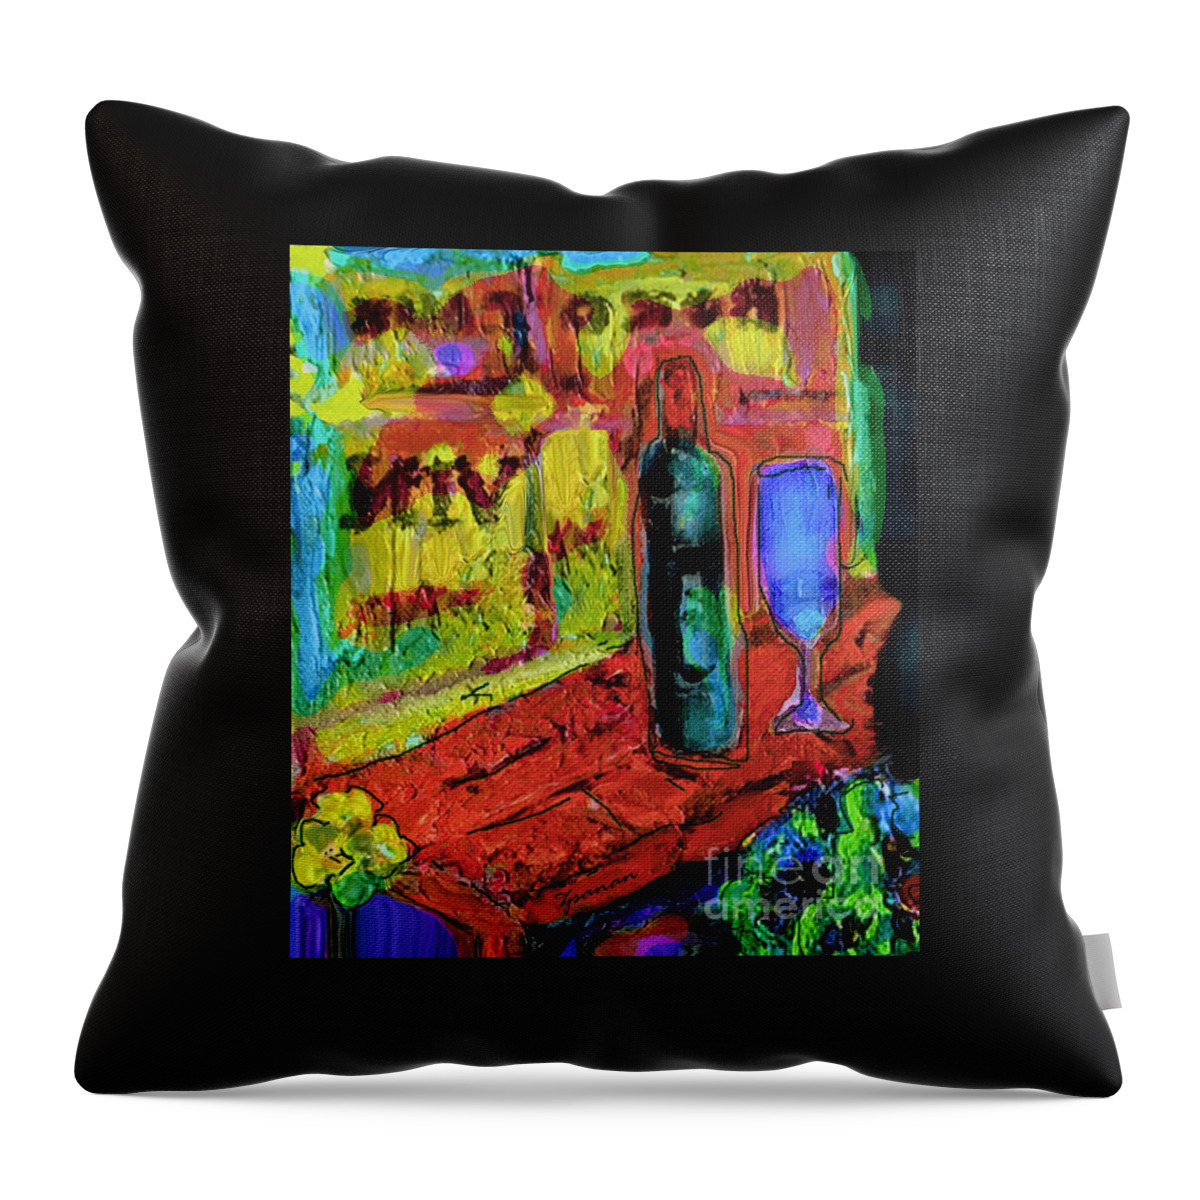 Original Art Throw Pillow featuring the painting Summer Wine by Zsanan Studio